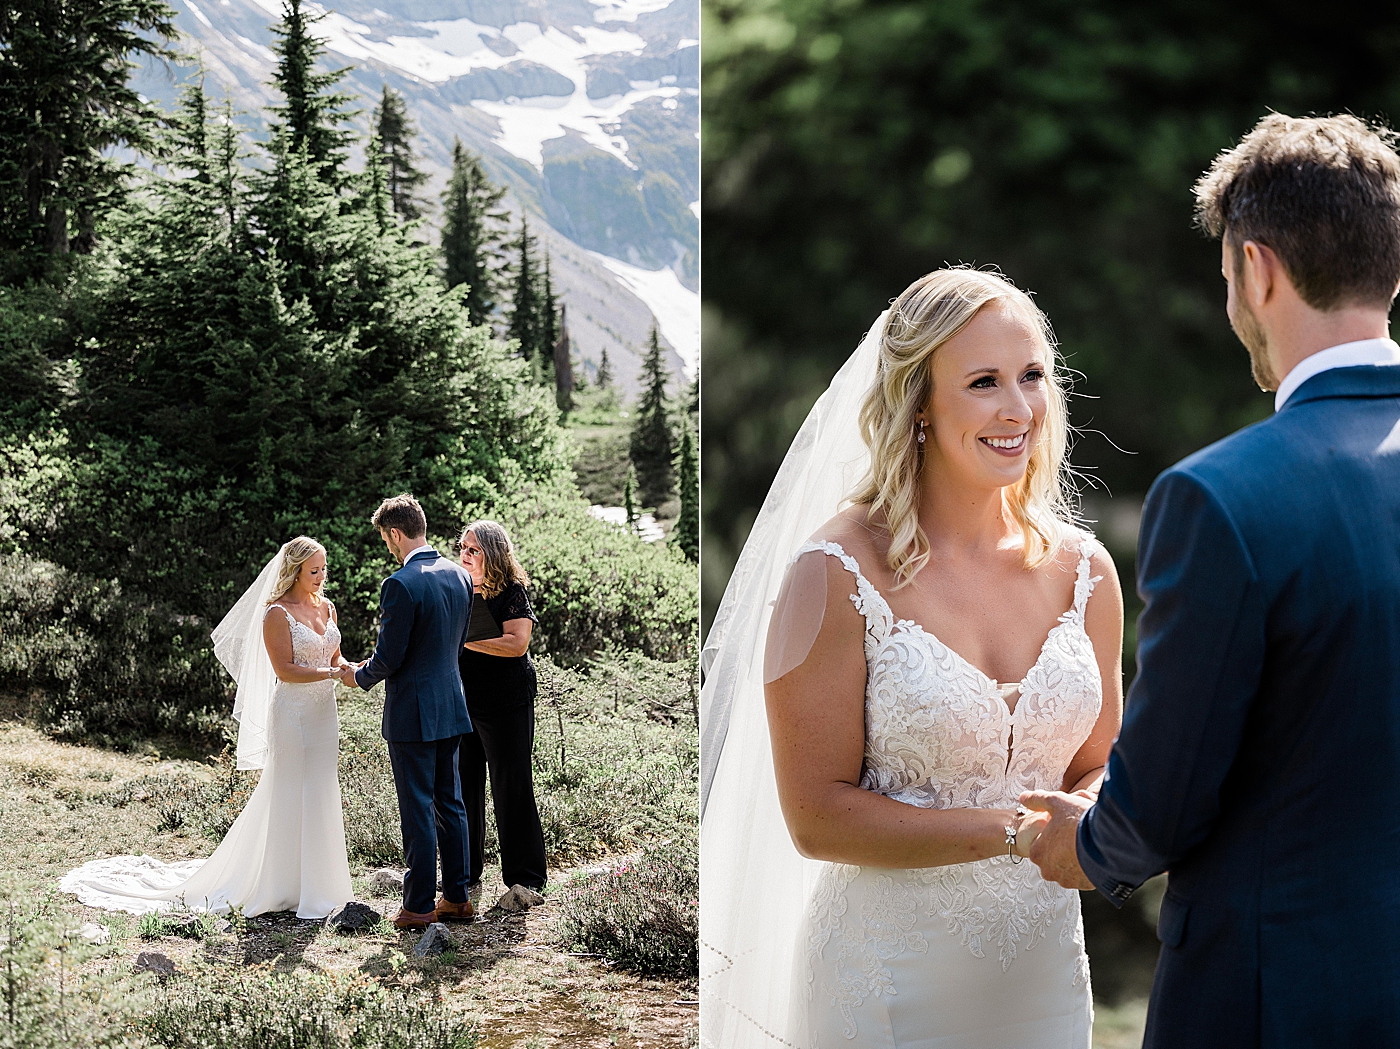 Bride and groom exchange vows during elopement ceremony at Mount Baker. Photo by Megan Montalvo Photography.